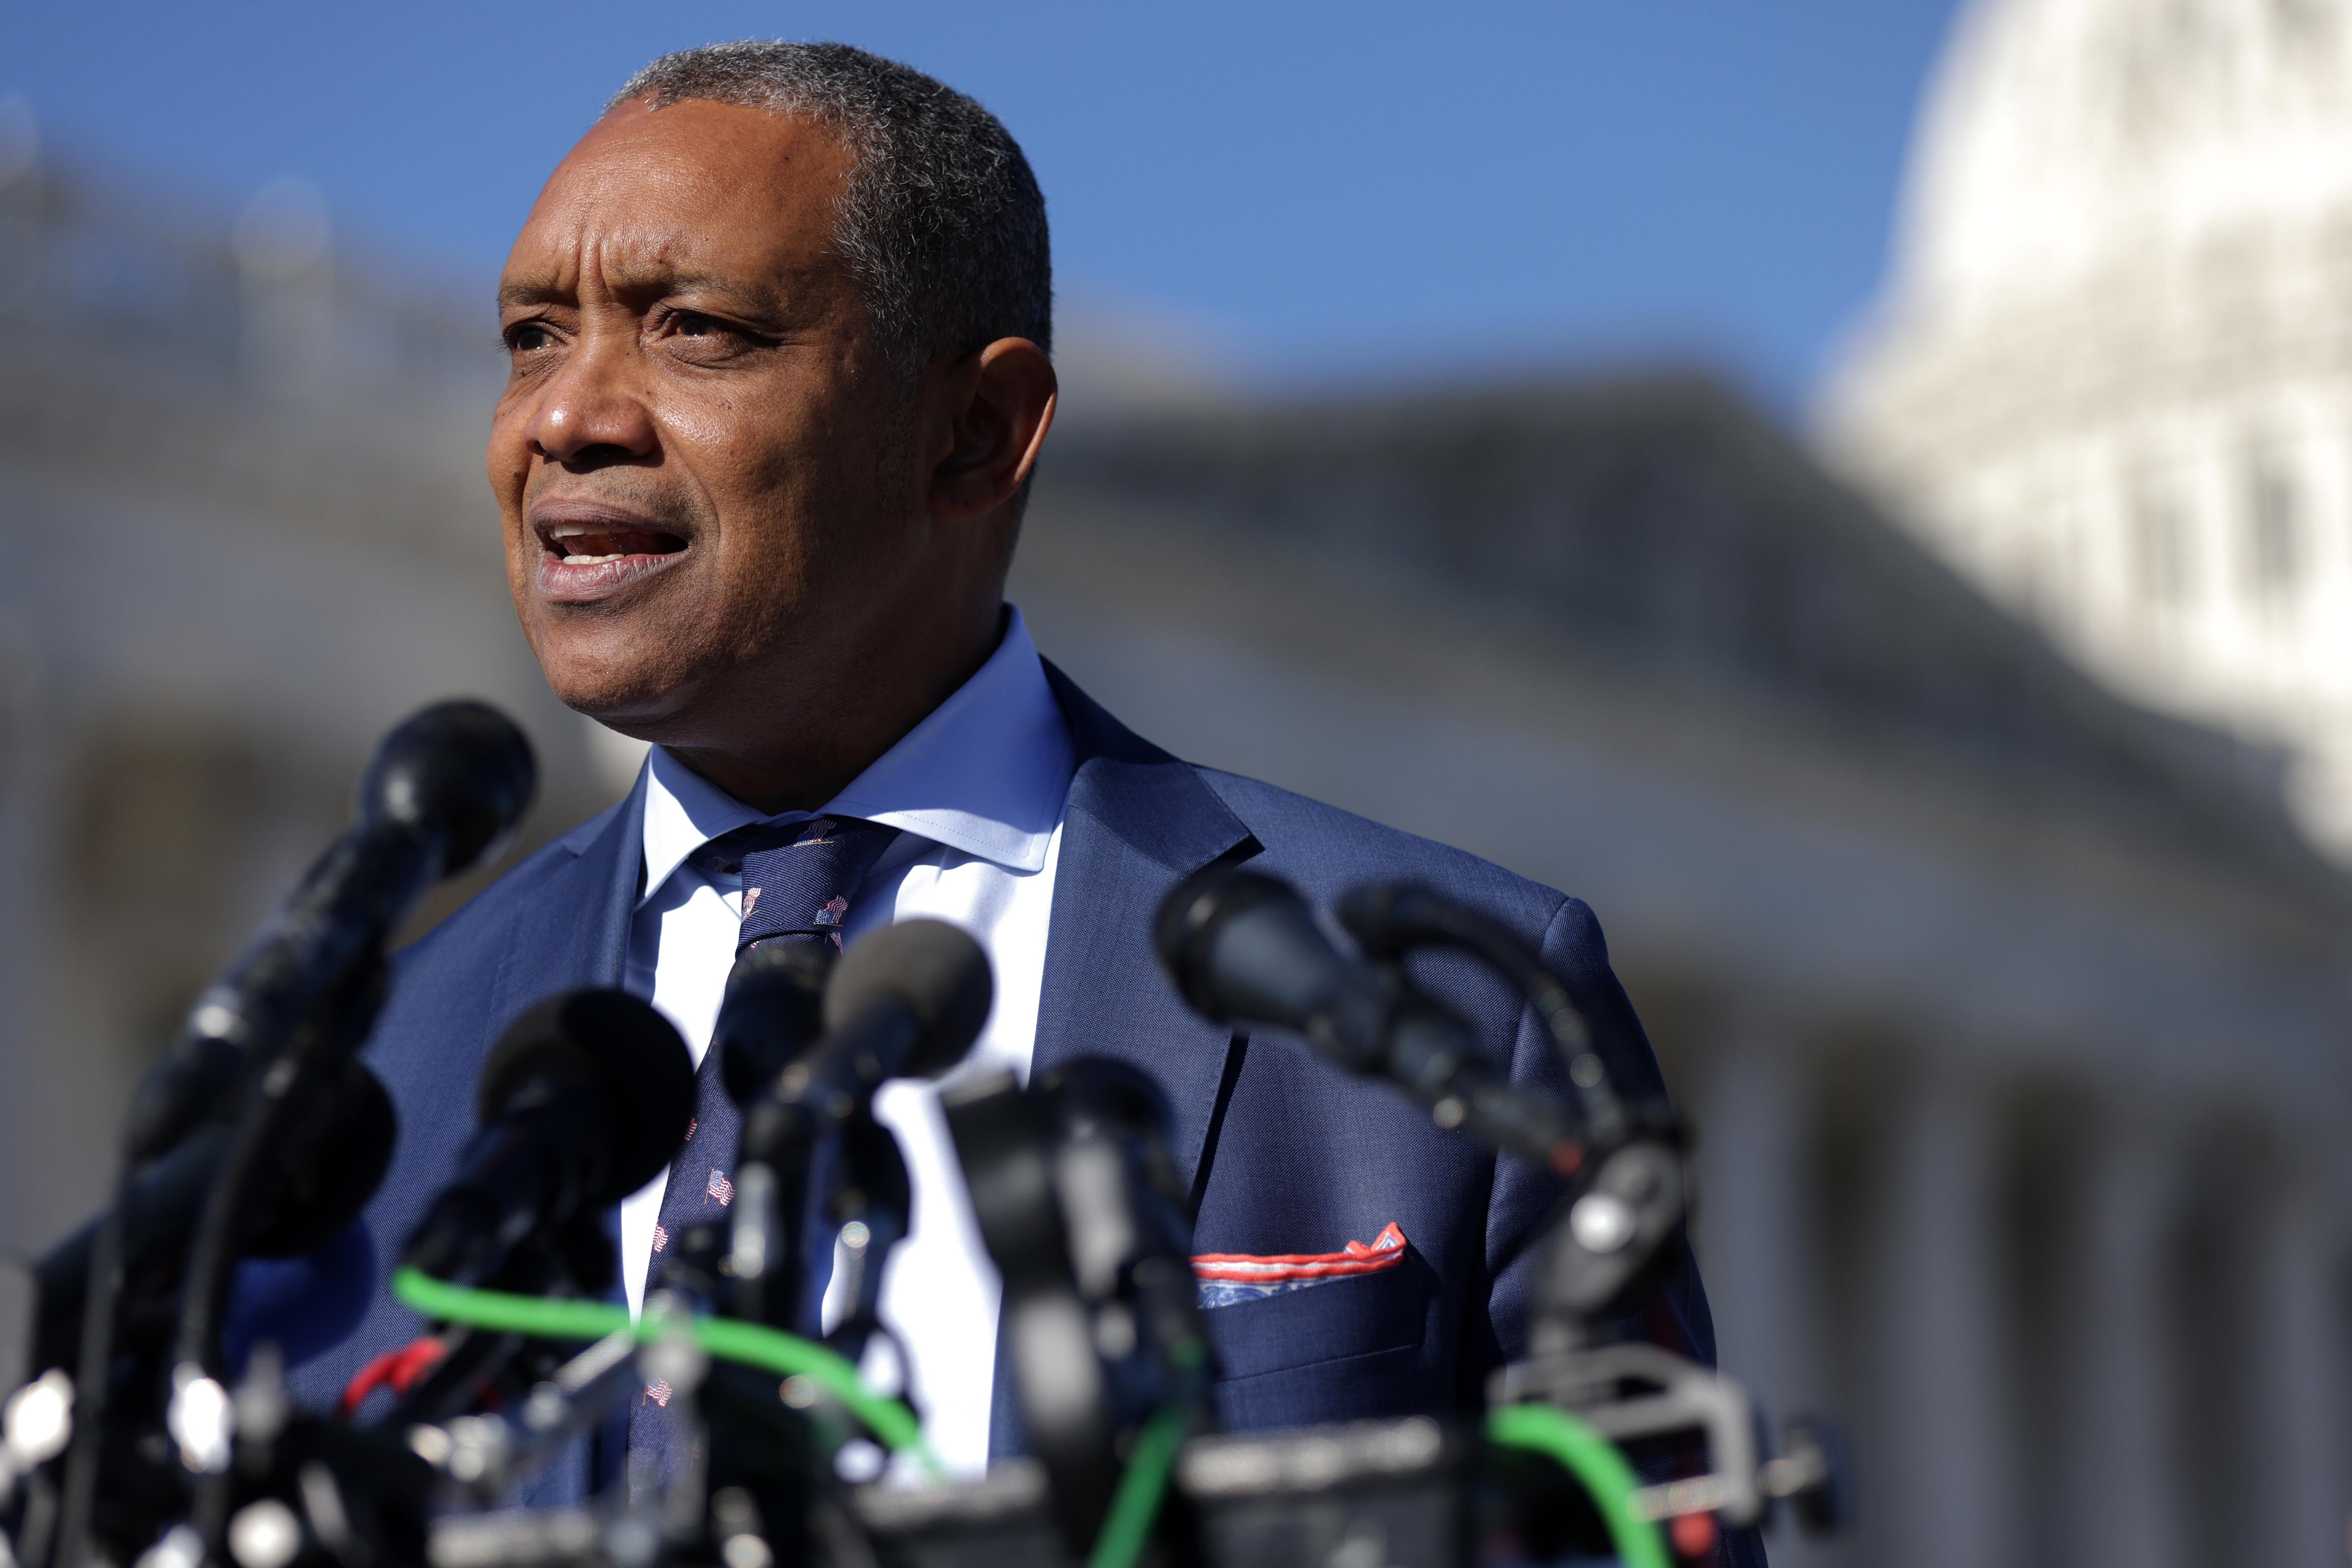 District of Columbia Attorney General Karl Racine speaks at a news conference on December 14, 2021, in Washington, D.C.